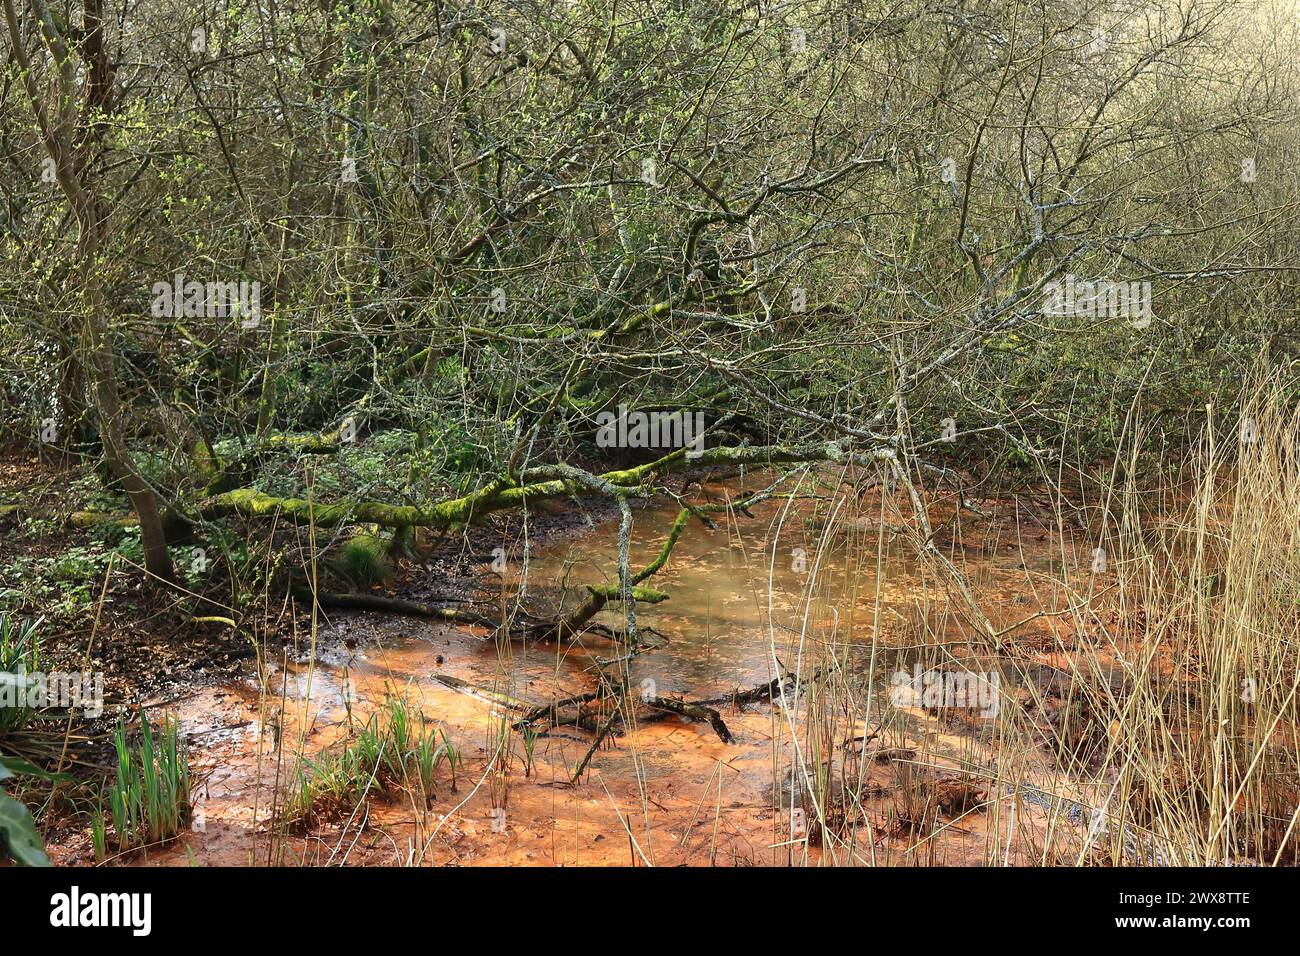 Wild trees and foliage over a calm rust red stream. Early spring photo taken in woodland in the Wildgrounds Nature Reserve in Gosport, England. Stock Photo